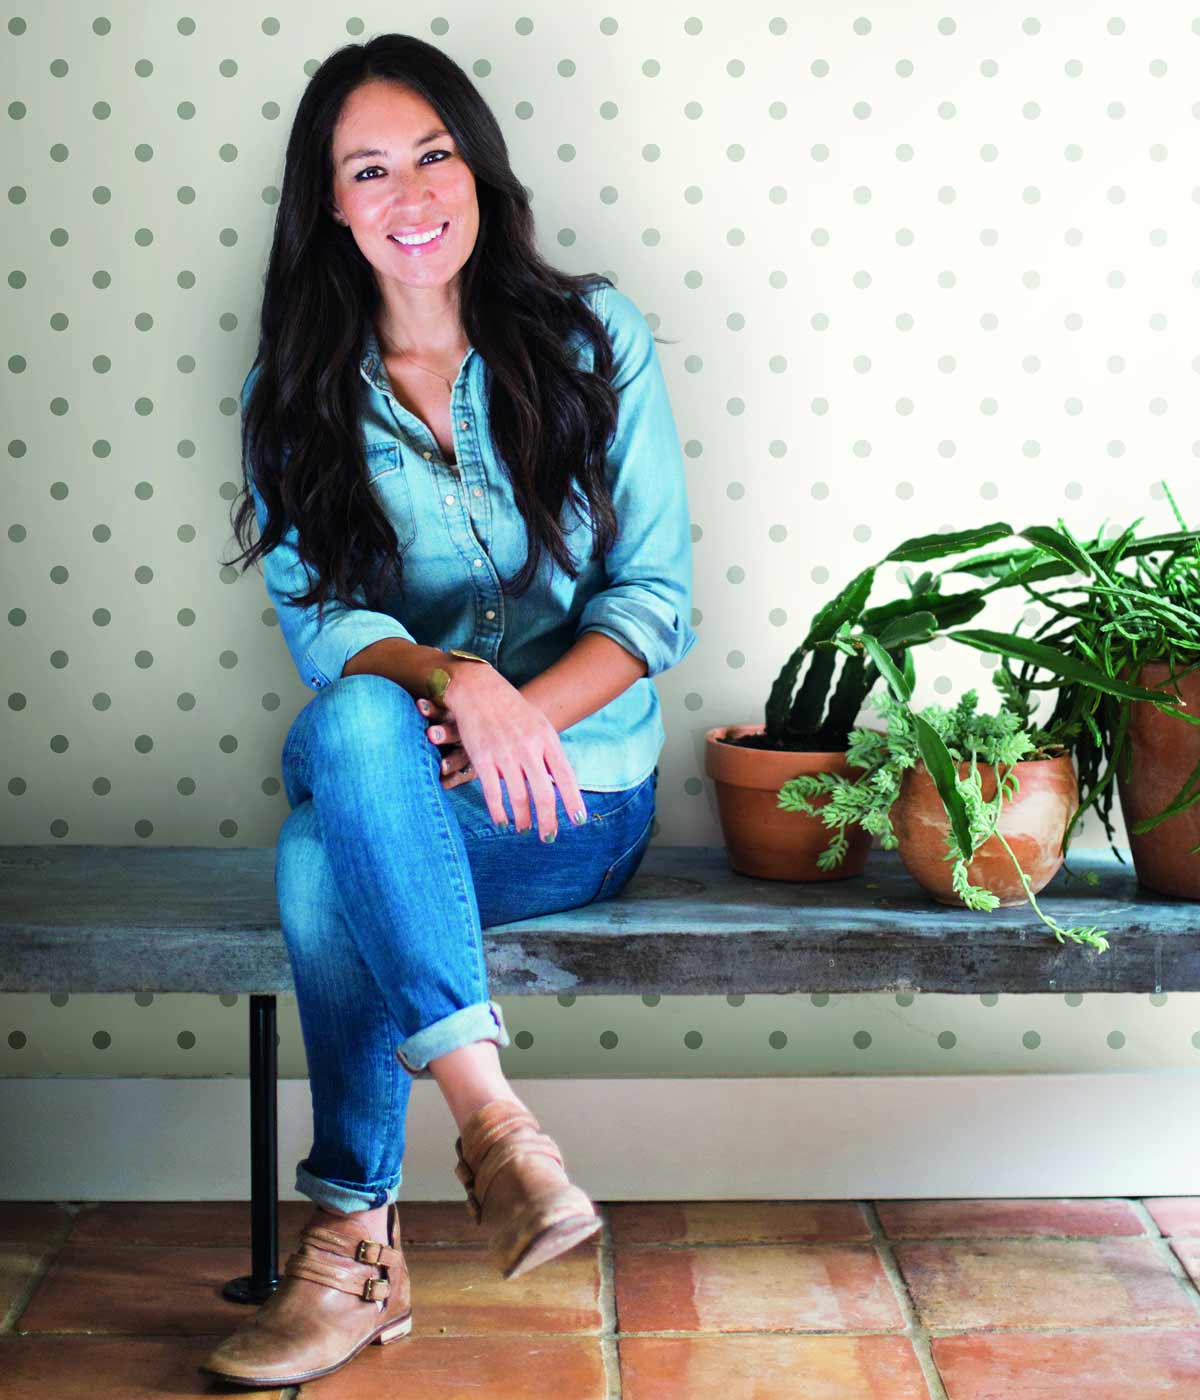 wallpaper designer Joanna Gaines in front of a wallpaper pattern by Magnolia Home